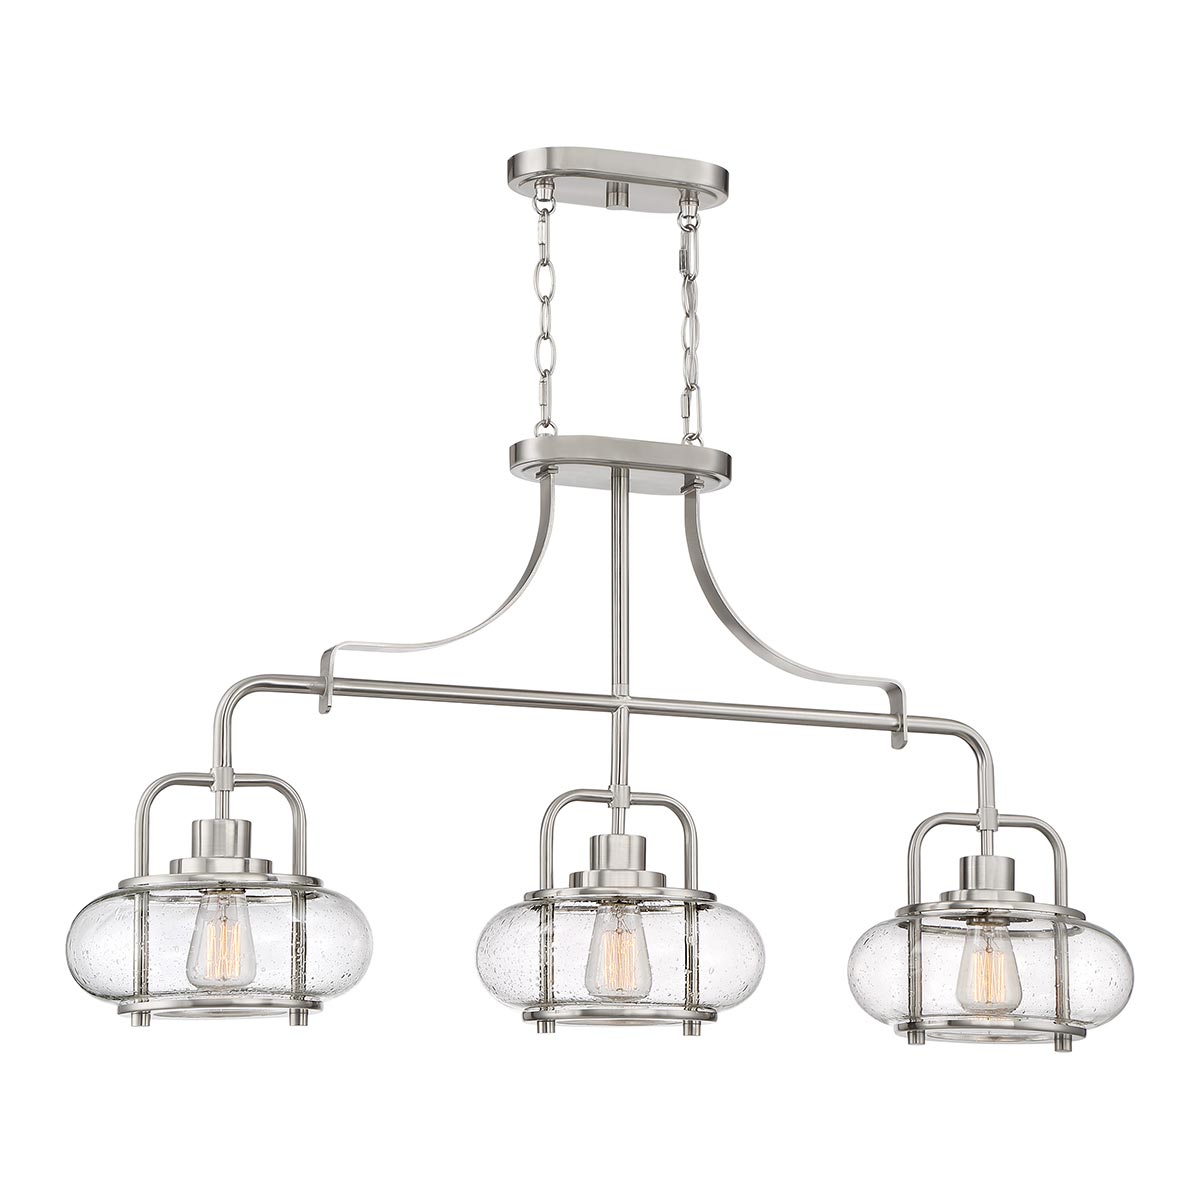 Quoizel Trilogy 3 Light Island Pendant Brushed Nickel Clear Seeded Glass